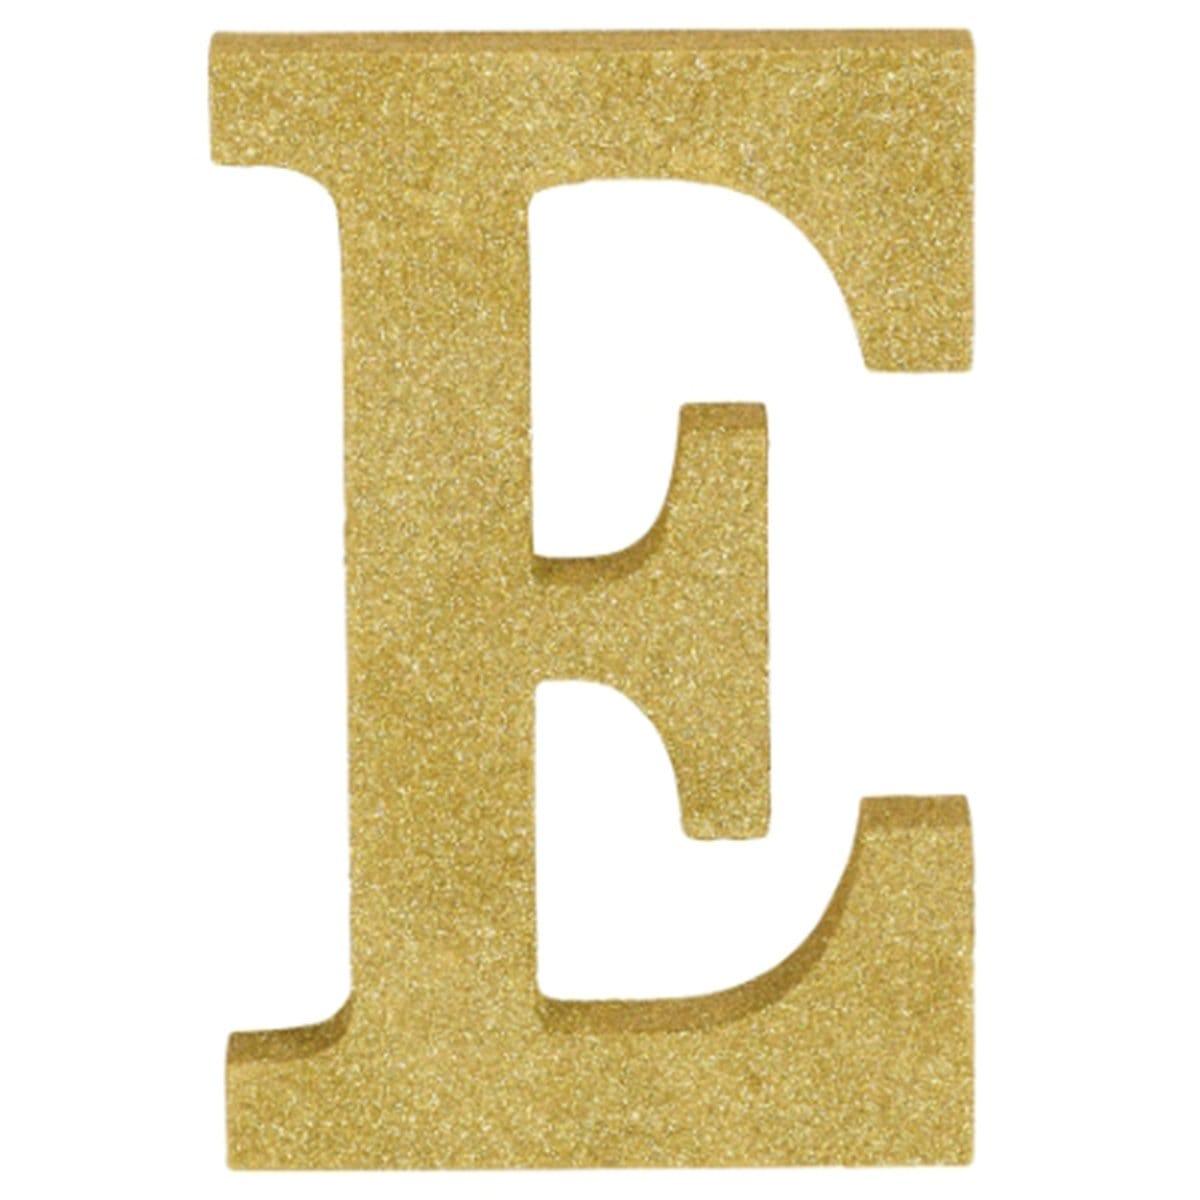 Buy Decorations Gold Glitter Letter - E sold at Party Expert